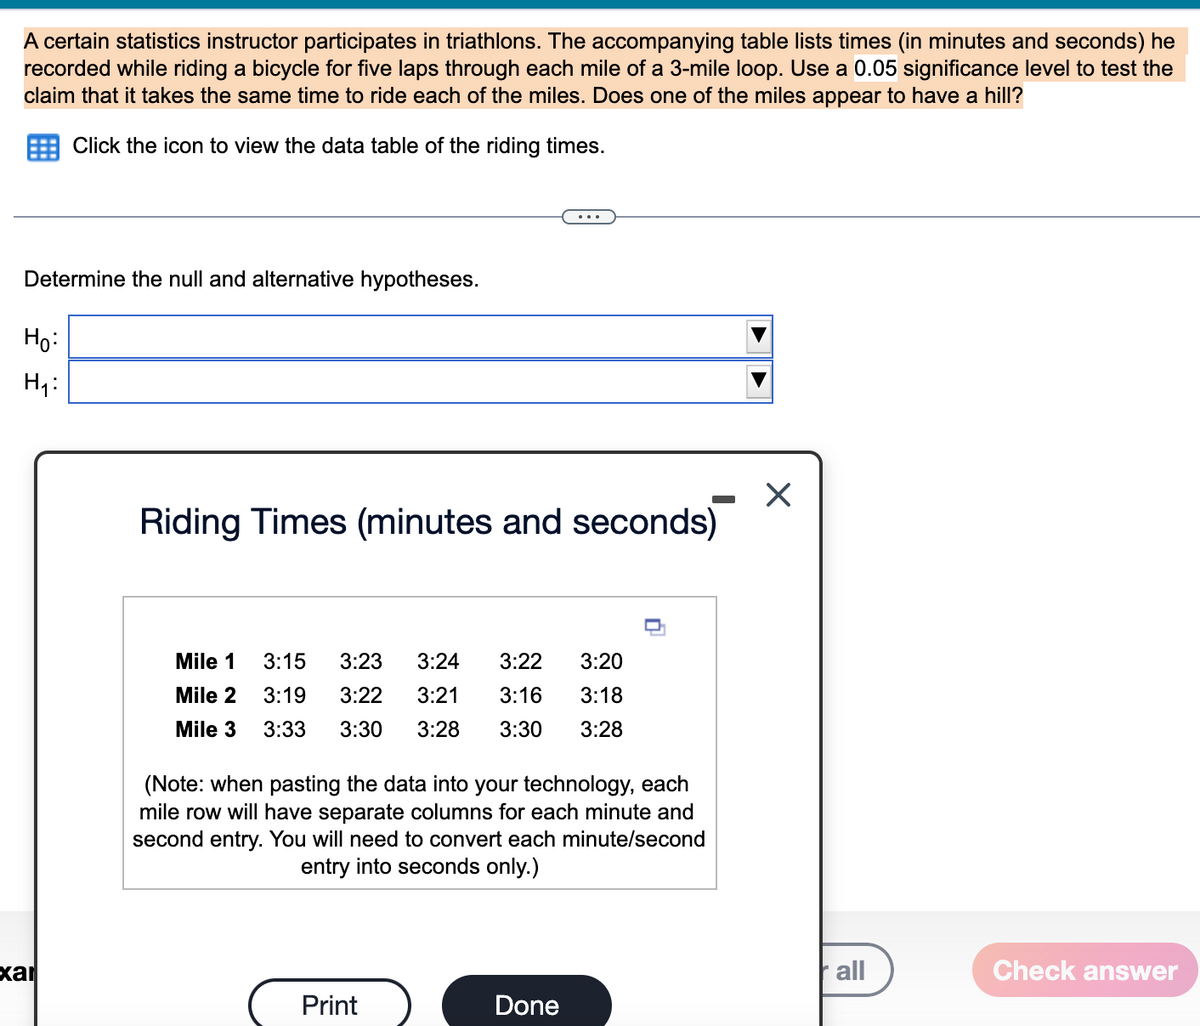 A certain statistics instructor participates in triathlons. The accompanying table lists times (in minutes and seconds) he
recorded while riding a bicycle for five laps through each mile of a 3-mile loop. Use a 0.05 significance level to test the
claim that it takes the same time to ride each of the miles. Does one of the miles appear to have a hill?
Click the icon to view the data table of the riding times.
Determine the null and alternative hypotheses.
Ho:
H₁:
xar
Riding Times (minutes and seconds)
Mile 1
Mile 2
Mile 3
3:15 3:23 3:24 3:22 3:20
3:19 3:22 3:21 3:16 3:18
3:33 3:30 3:28 3:30 3:28
(Note: when pasting the data into your technology, each
mile row will have separate columns for each minute and
second entry. You will need to convert each minute/second
entry into seconds only.)
Print
Done
X
all
Check answer